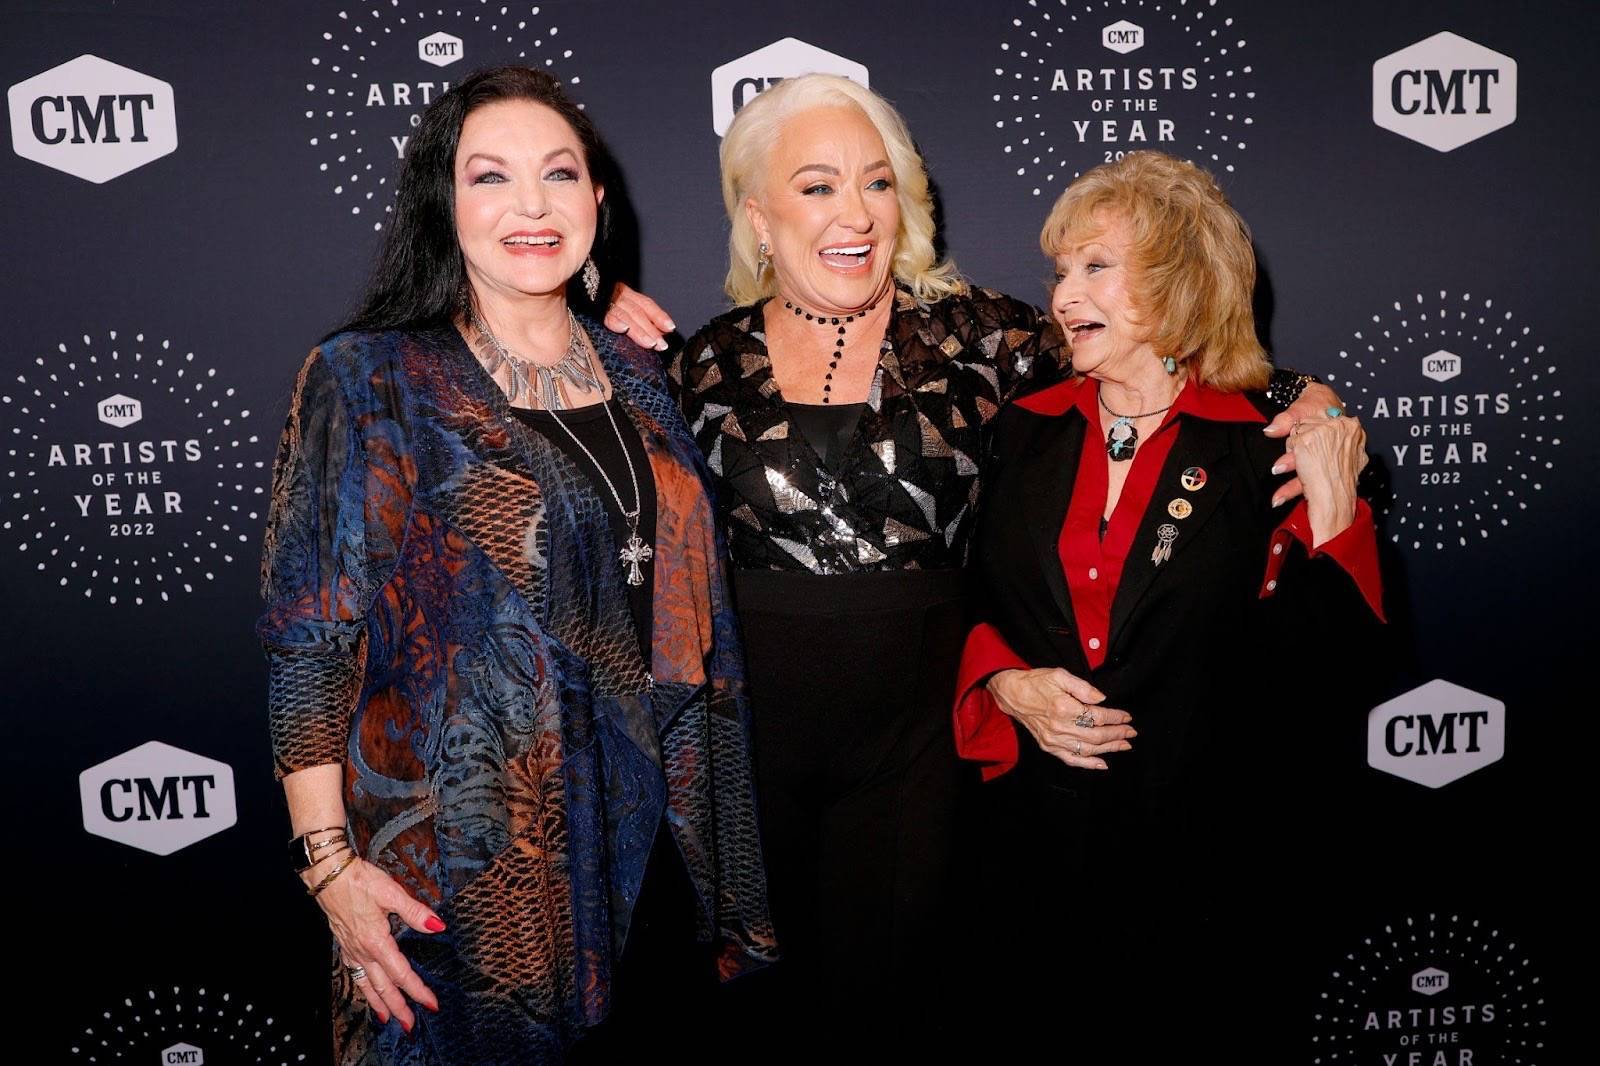 CRYSTAL GAYLE, TANYA TUCKER AND PEGGY SUE WRIGHT ON THE BLACK CARPET AT THE 2022 CMT ARTISTS OF THE YEAR CELEBRATION.